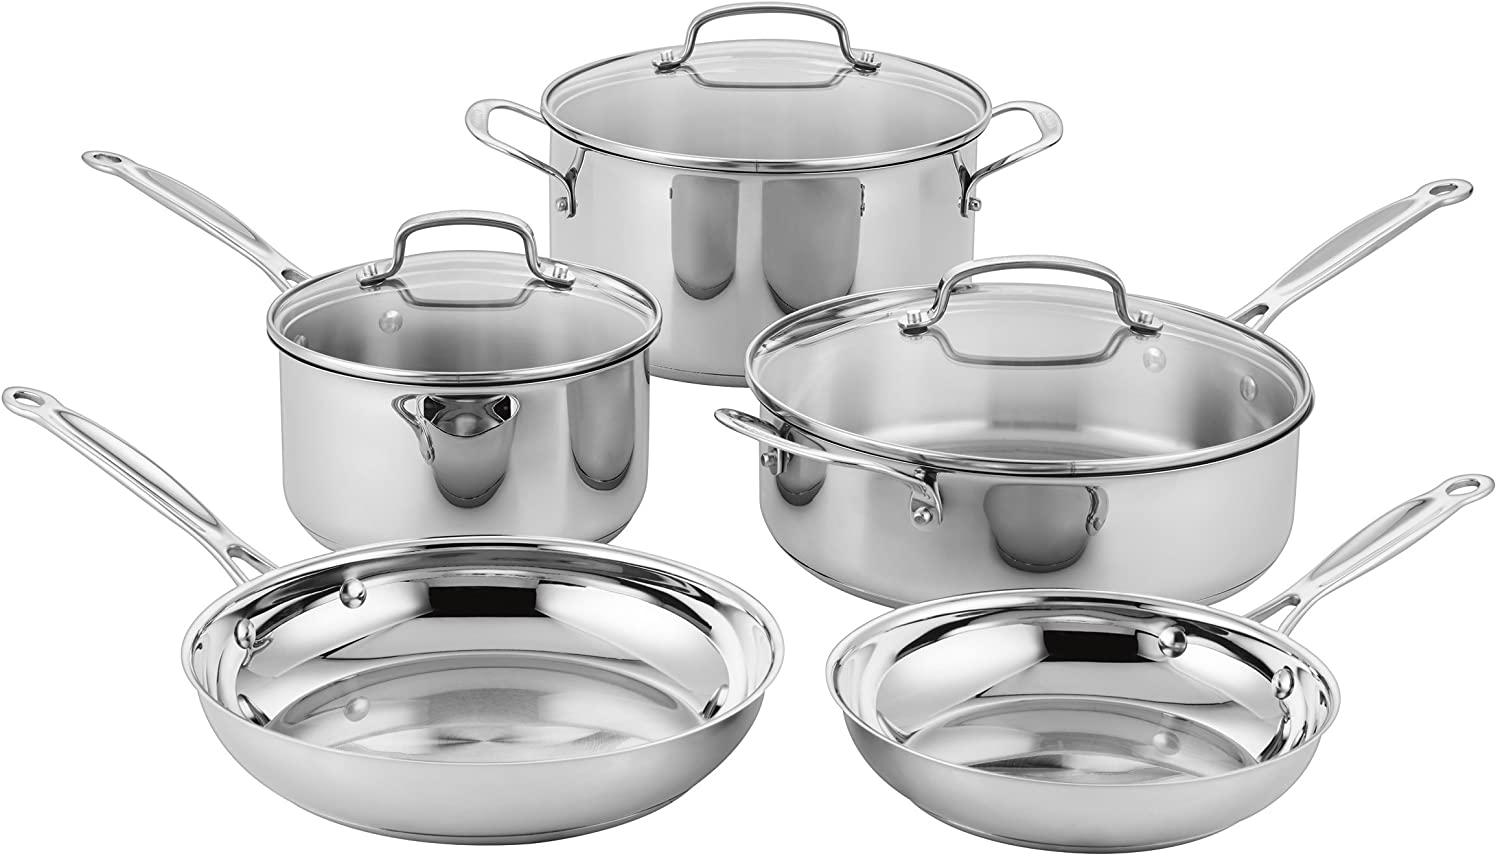 Cuisinart 8-Piece Classic Stainless Steel Cookware Set for $99.99 Shipped